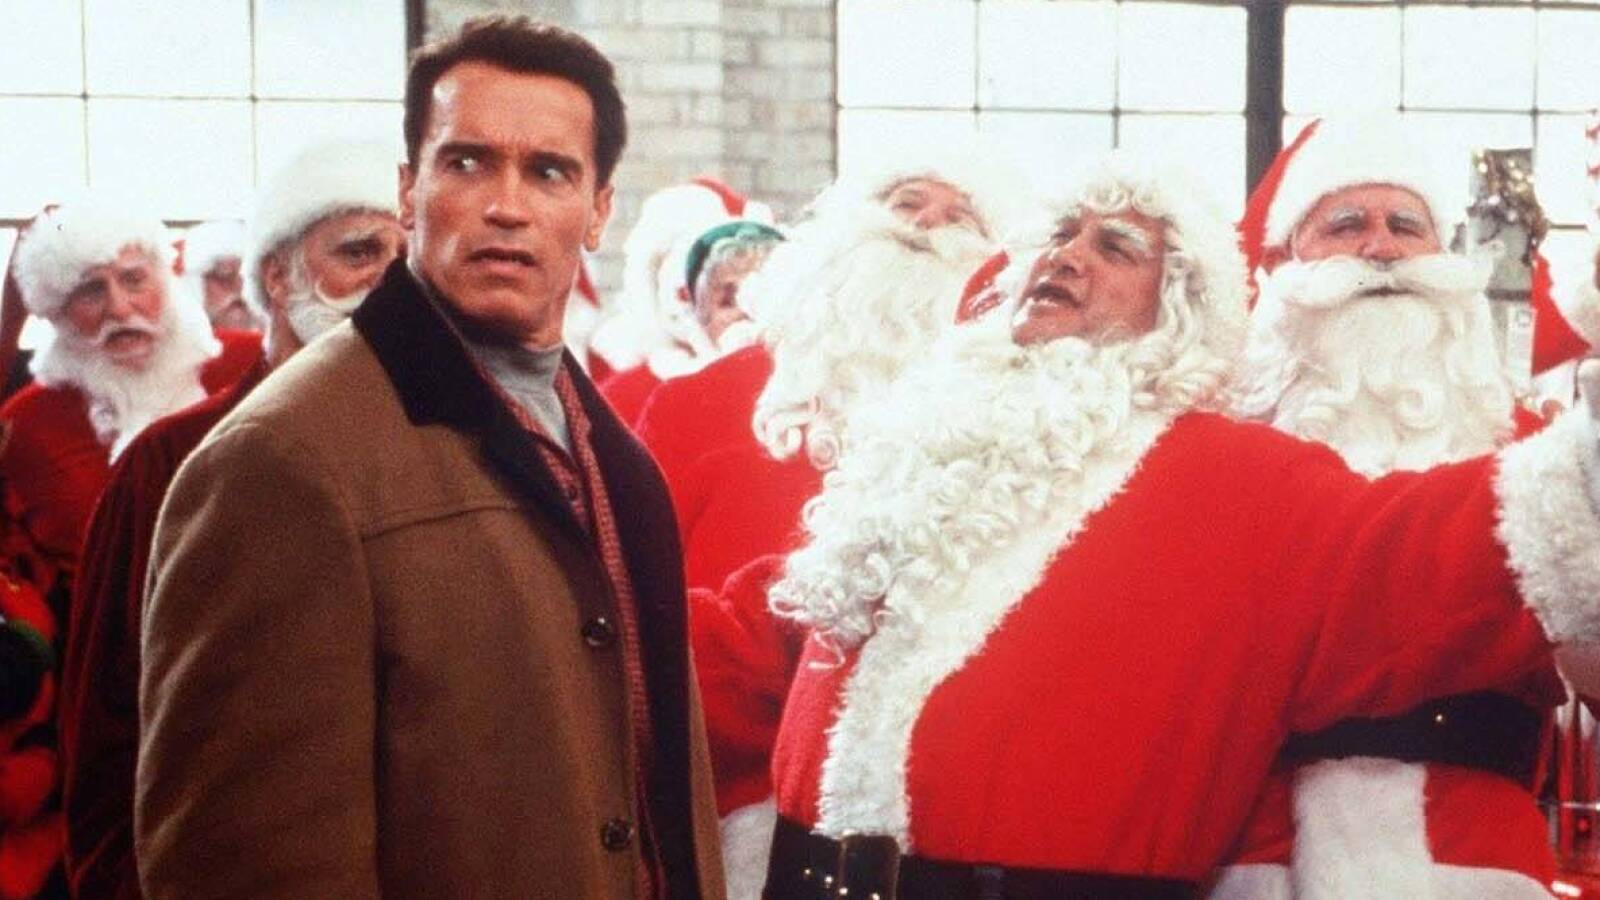 20 facts you might not know about ‘Jingle All the Way’